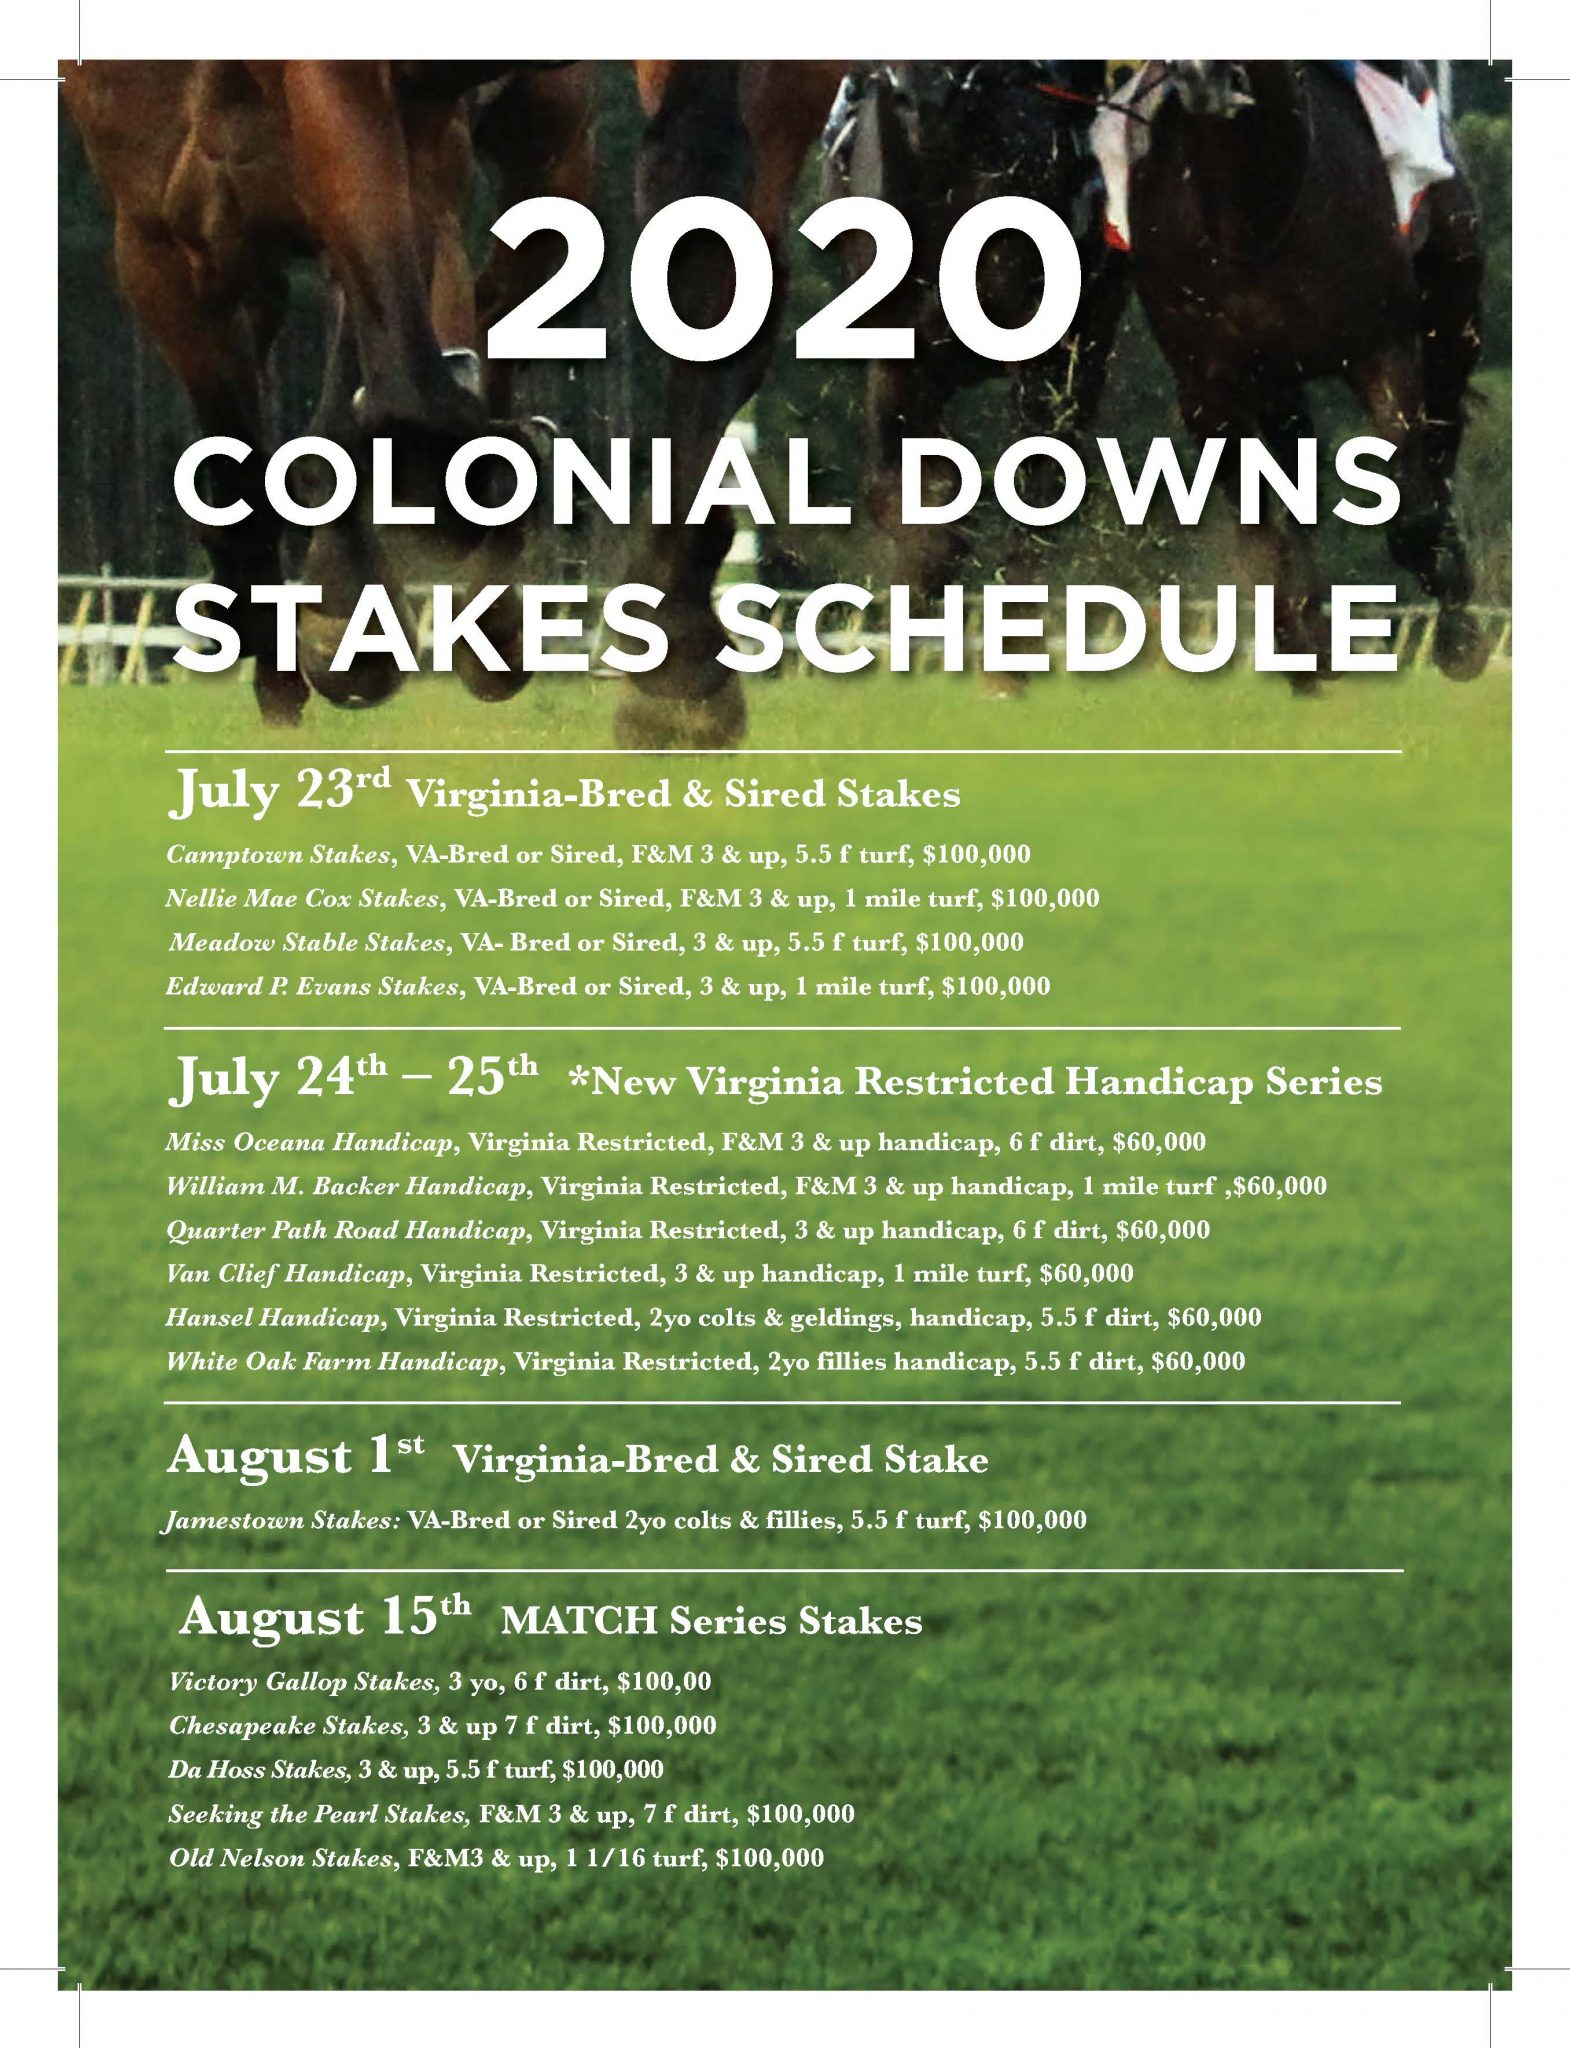 2020 Colonial Downs Stakes Schedule, Featuring VA-Bred, Sired